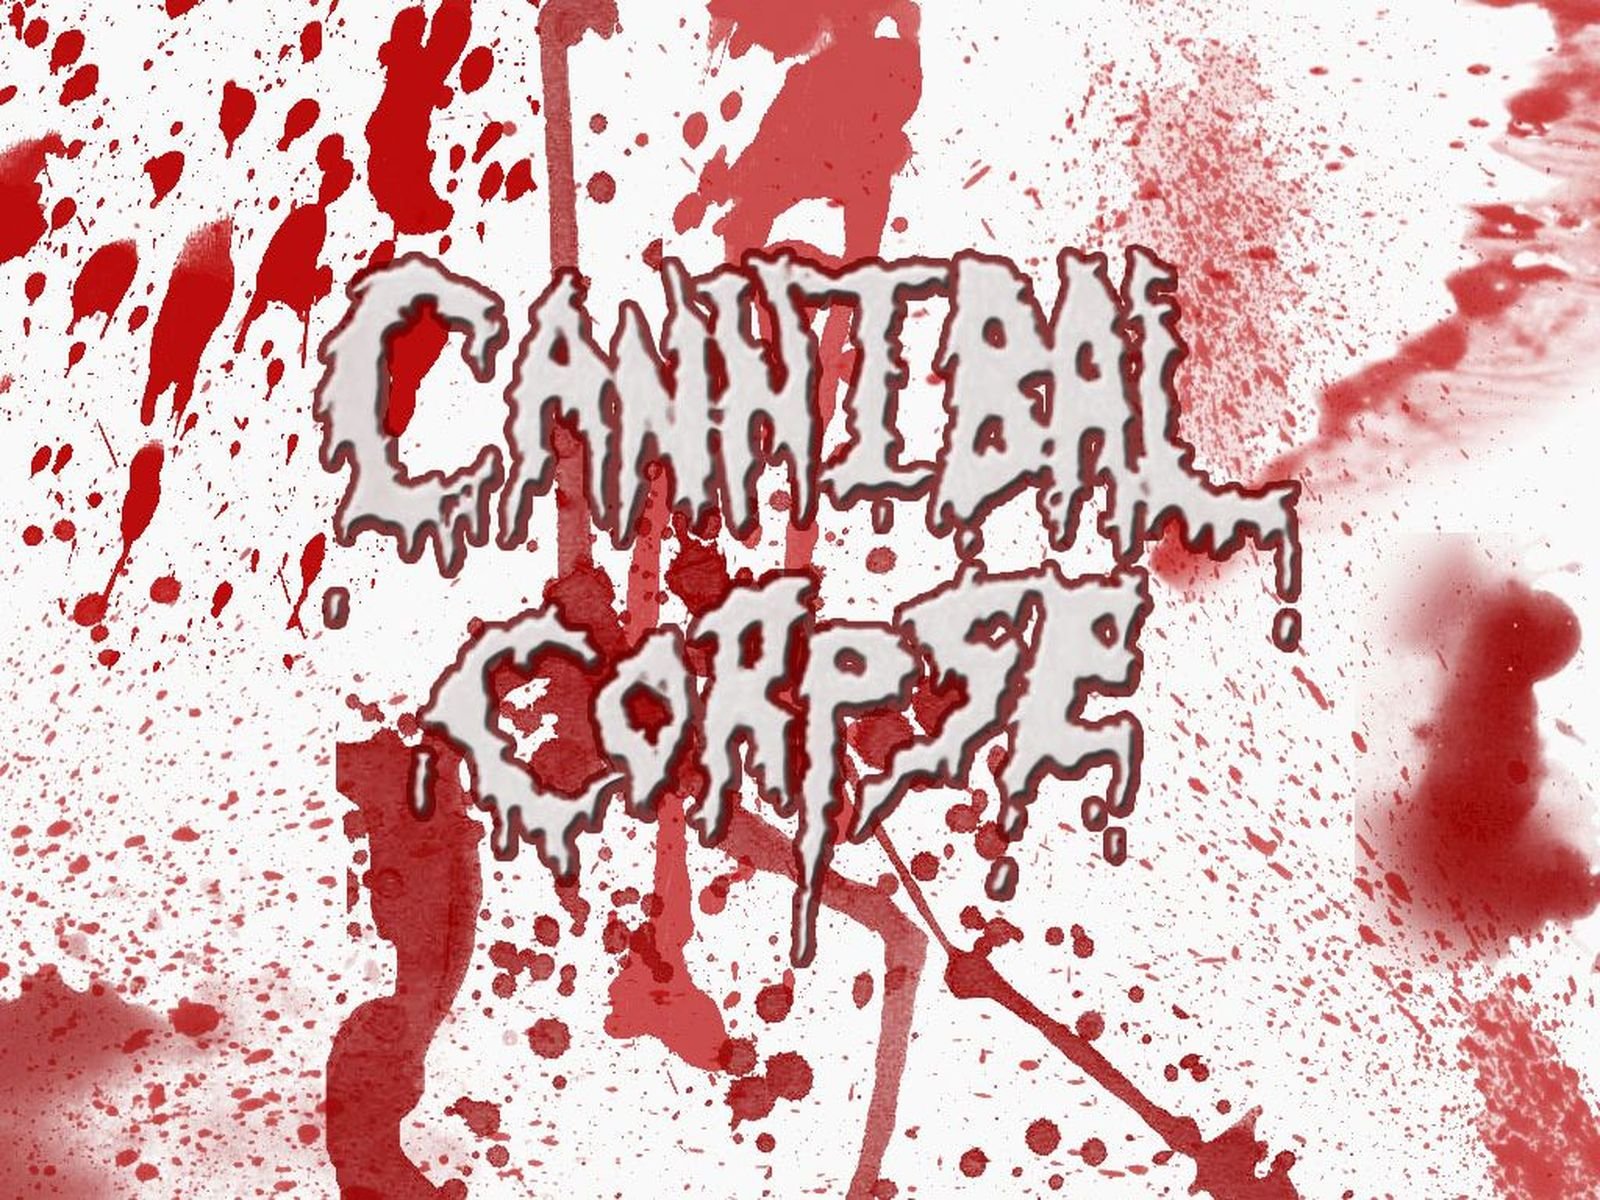 Cannibal Corpse Cannibalcorpse13 Wallpaper Metal Bands Heavy